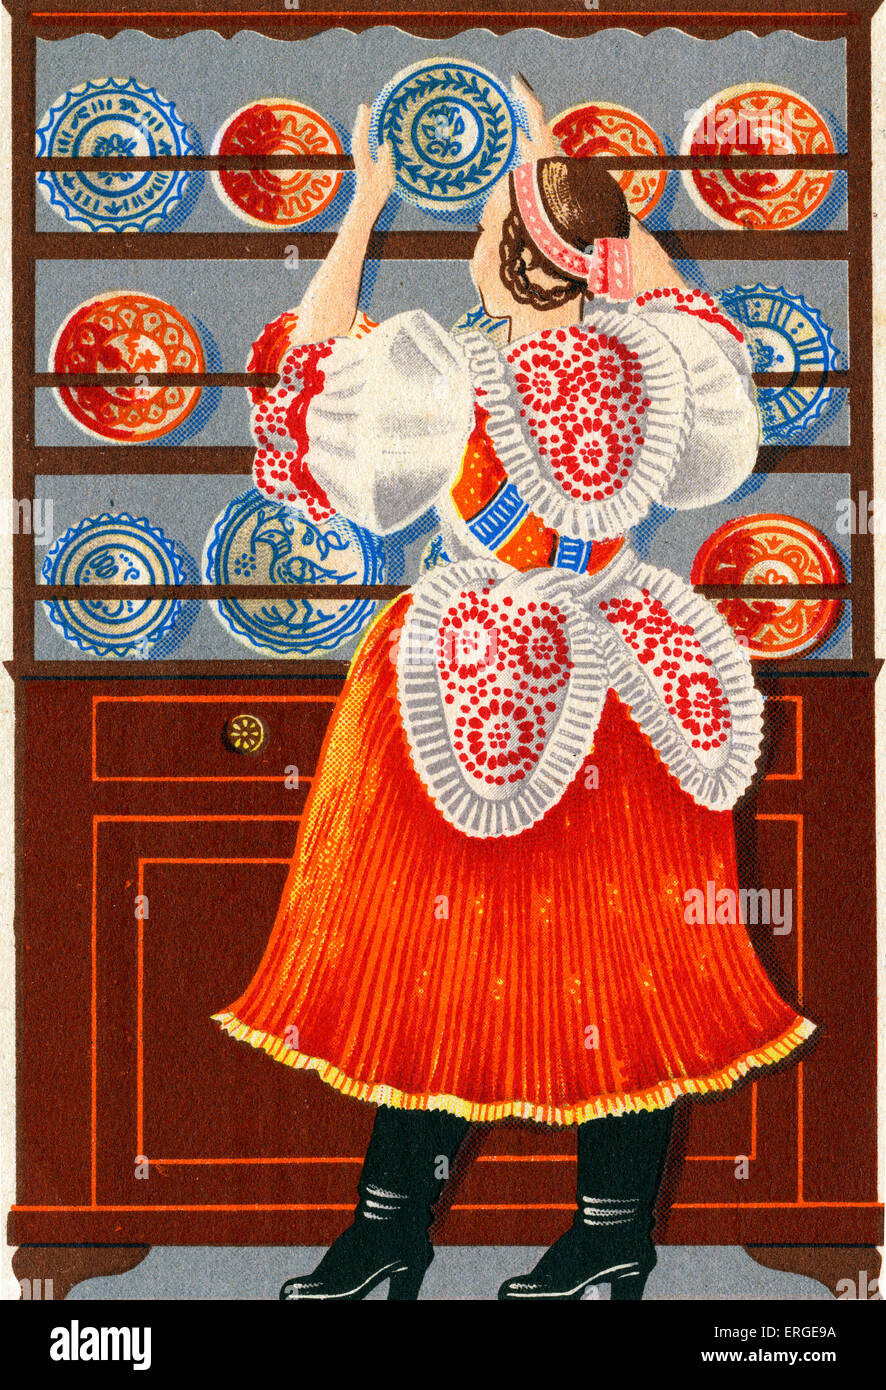 Woman in traditional Hungarian dress - placing a decorated plate in a dresser. 1950s. Radio Budapest postcard. Stock Photo